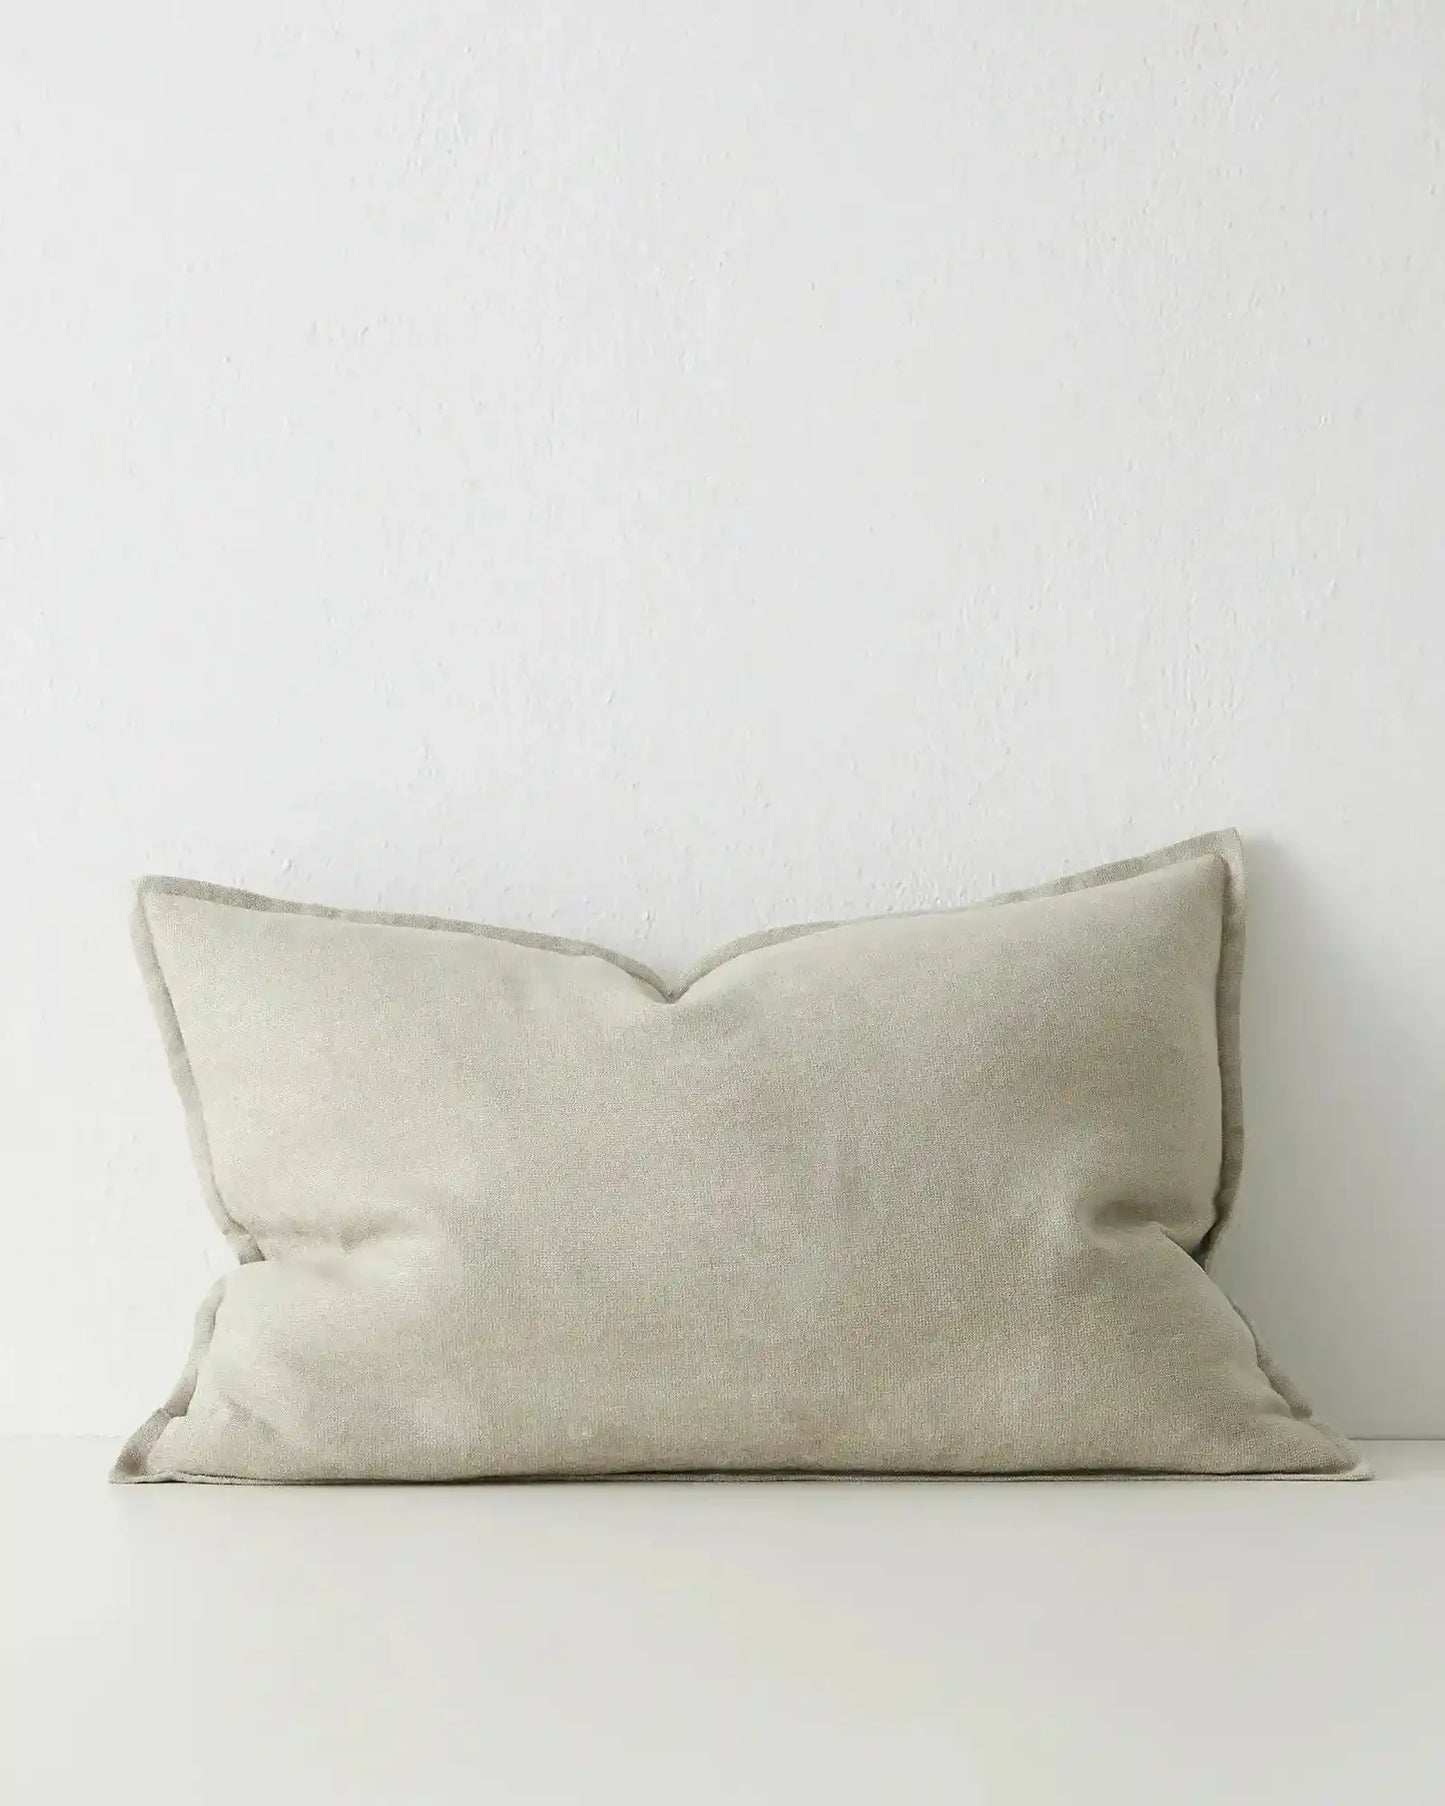 FIORE LINEN BLEND CHENILLE CUSHION 40 X 60CM choose from 9 colours